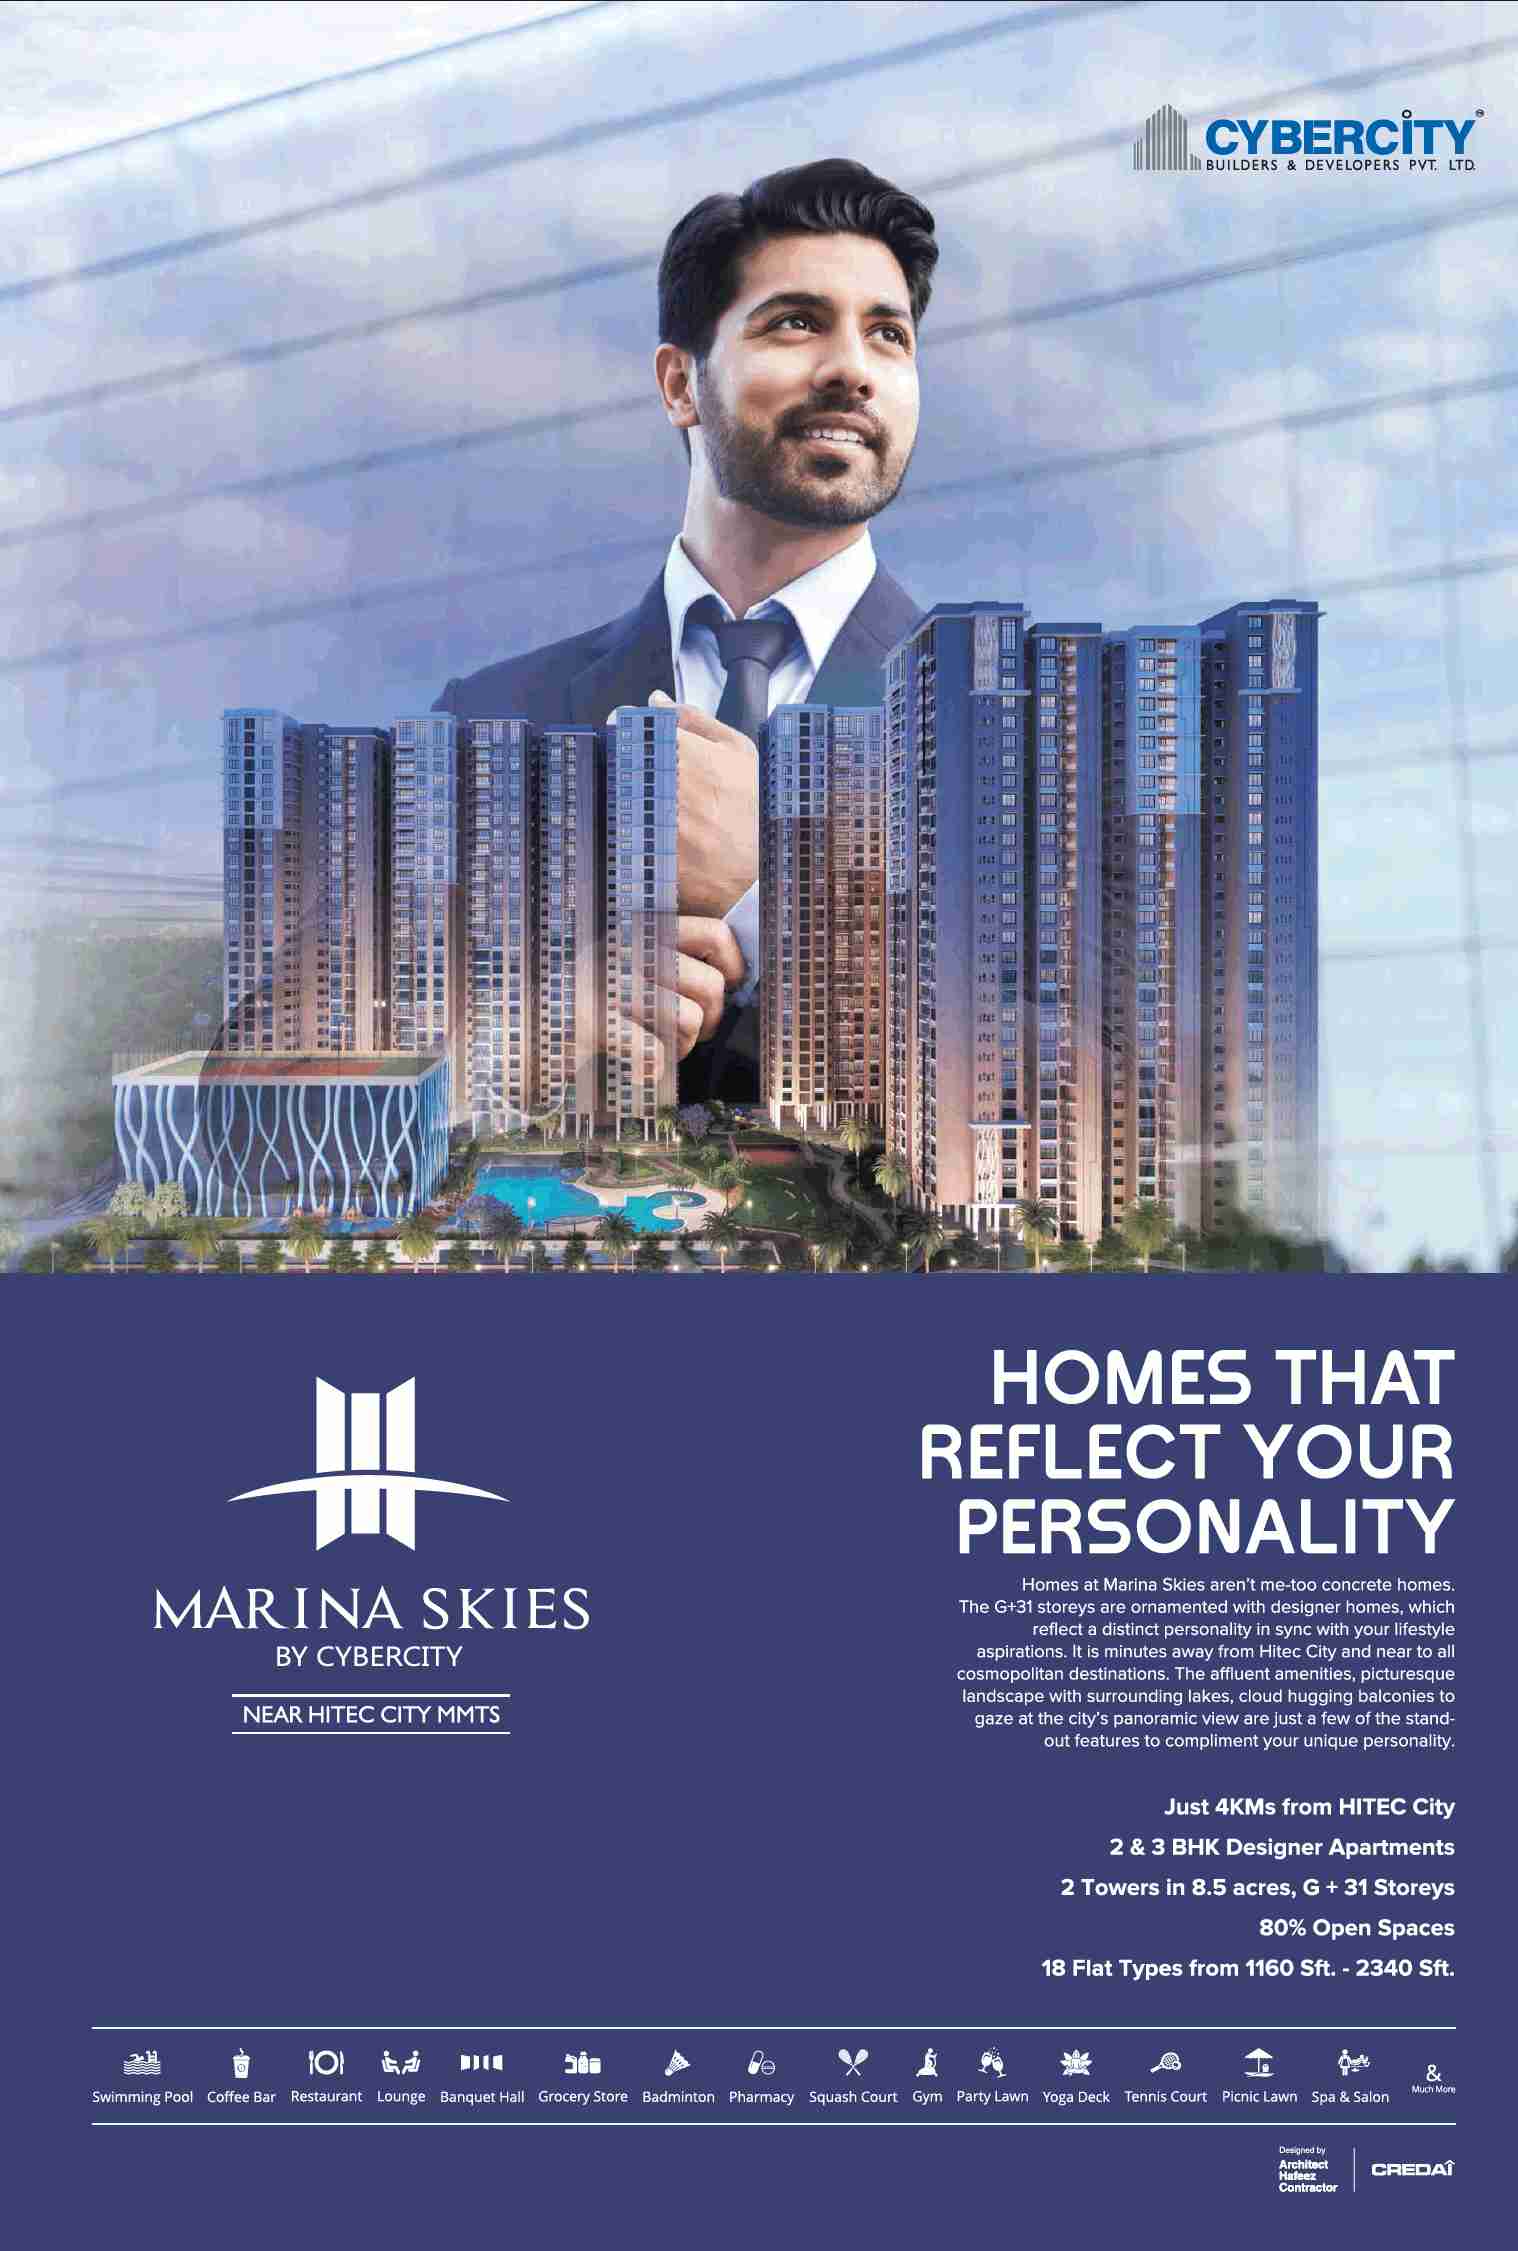 Enjoy the panoramic view of the city by residing at Cybercity Marina Skies in Hyderabad